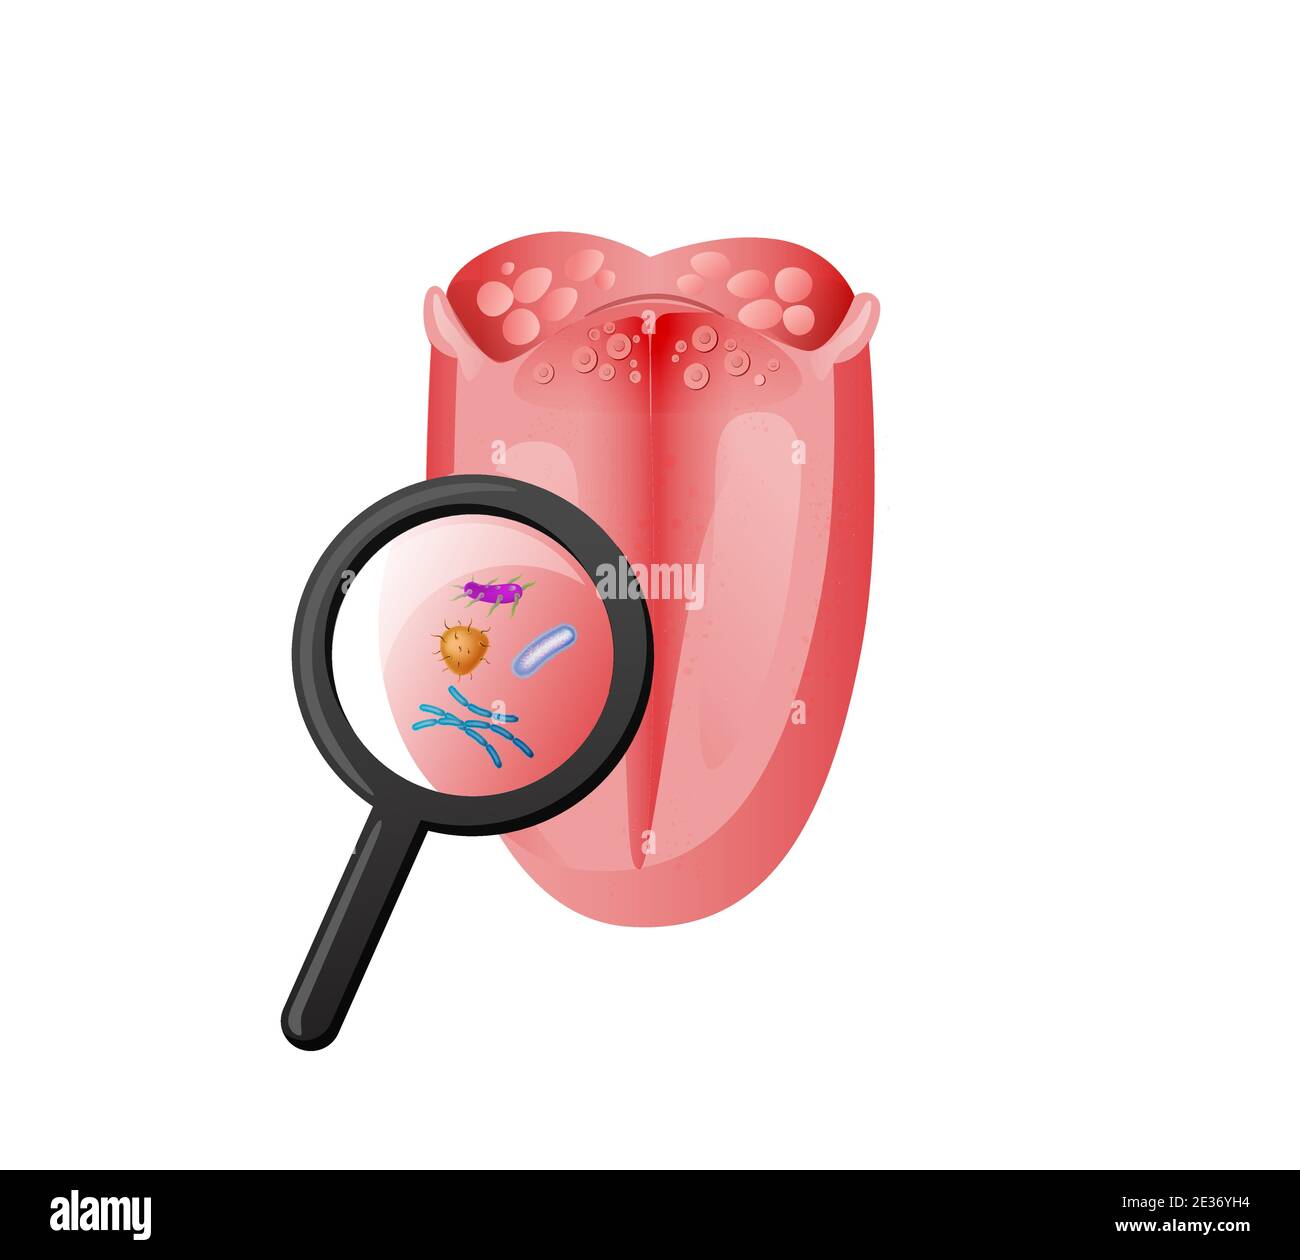 Tongue examination infection and bacteria illustration. Magnifying glass study inflammation red tissue and taste disturbances. Stock Vector